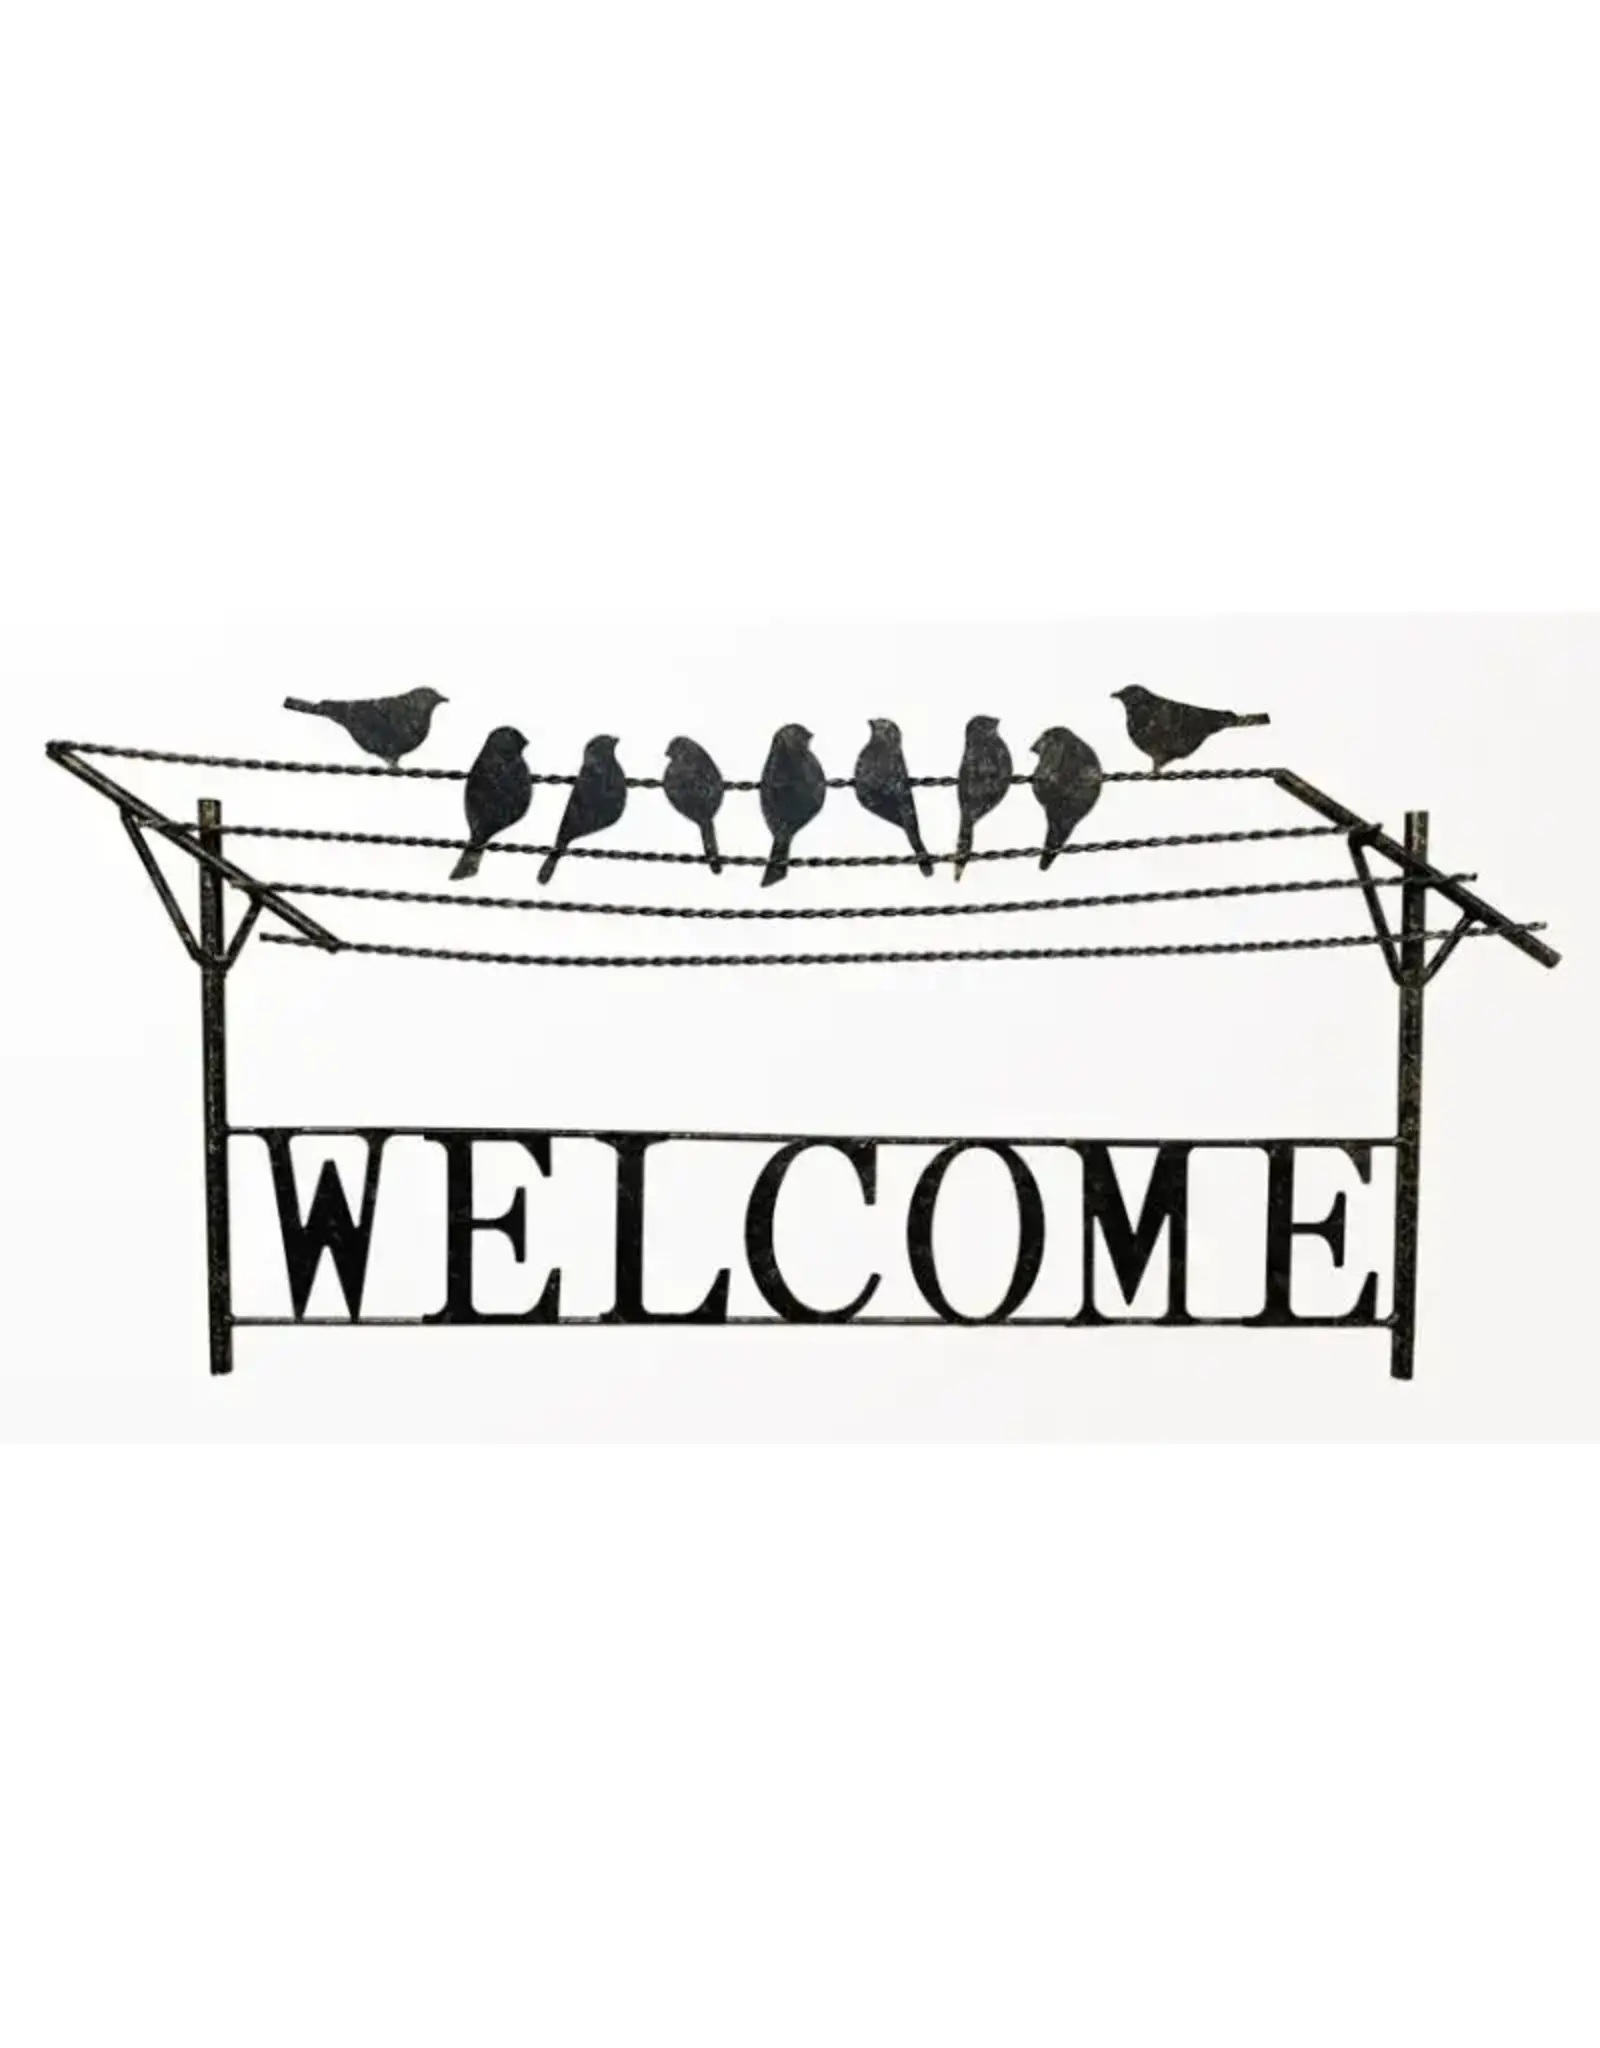 Panam Decor & Gifts PUI99051 Metal Welcome Sign with Birds on the Clothesline, Pewter Colour